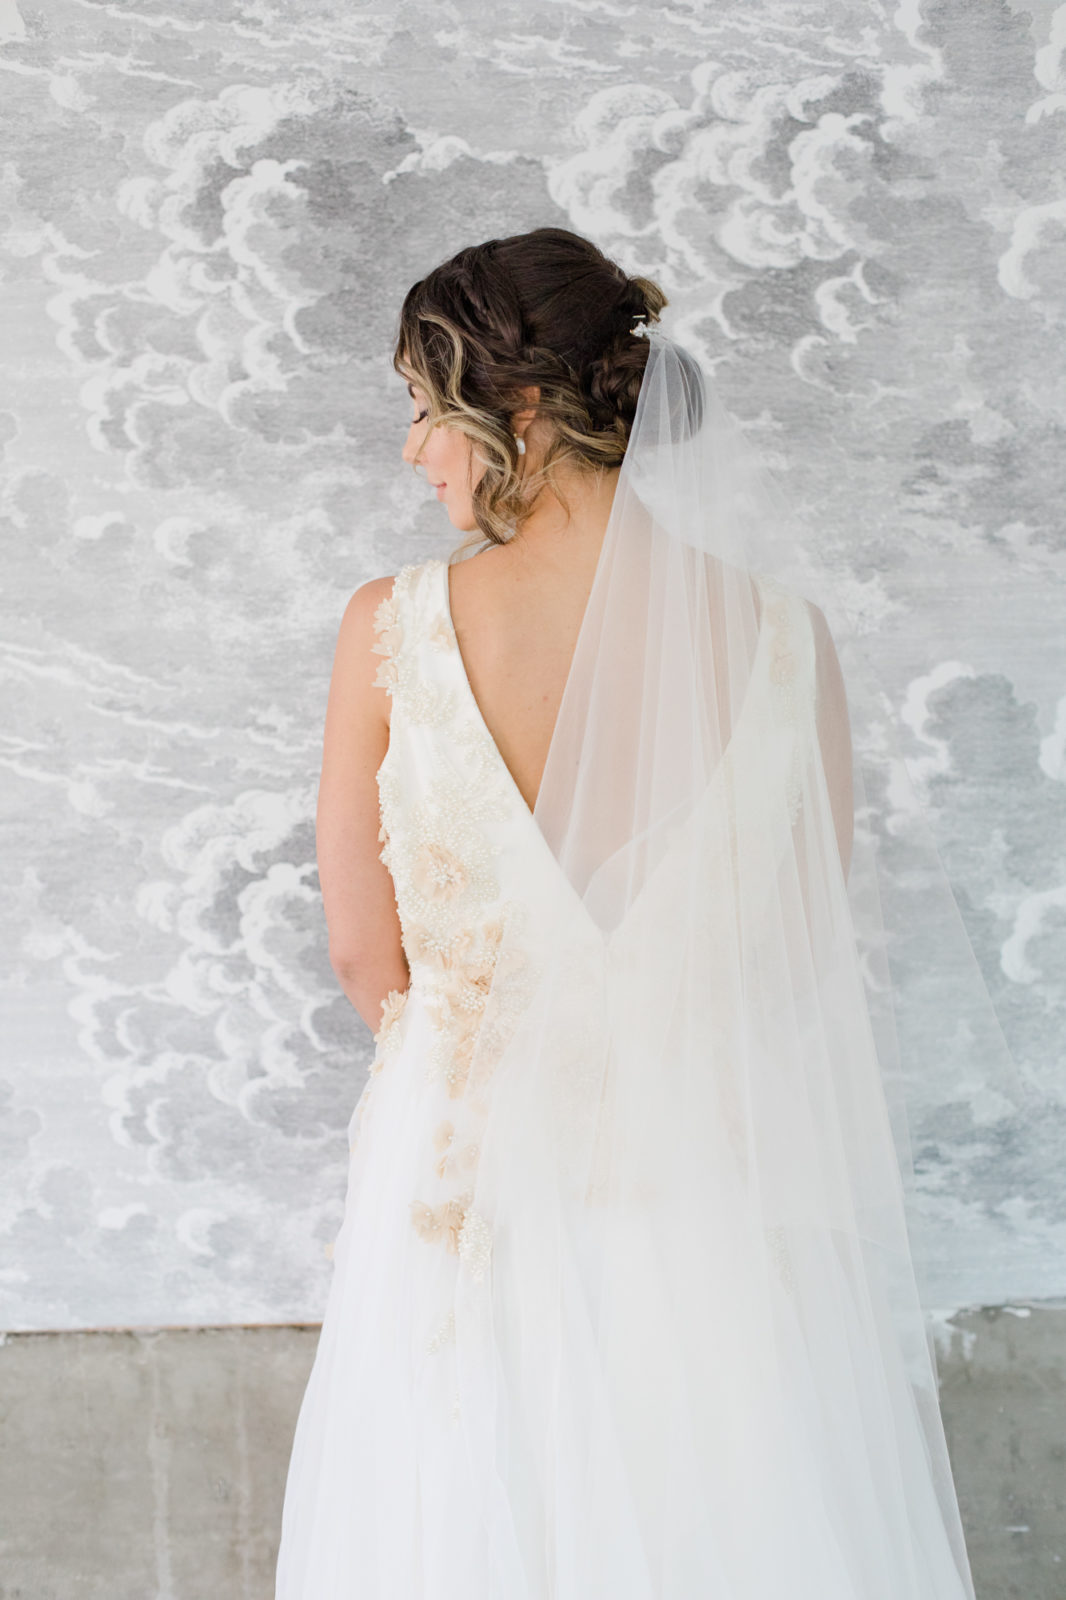 Romantic bridal veil with whimsical cloud backdrop